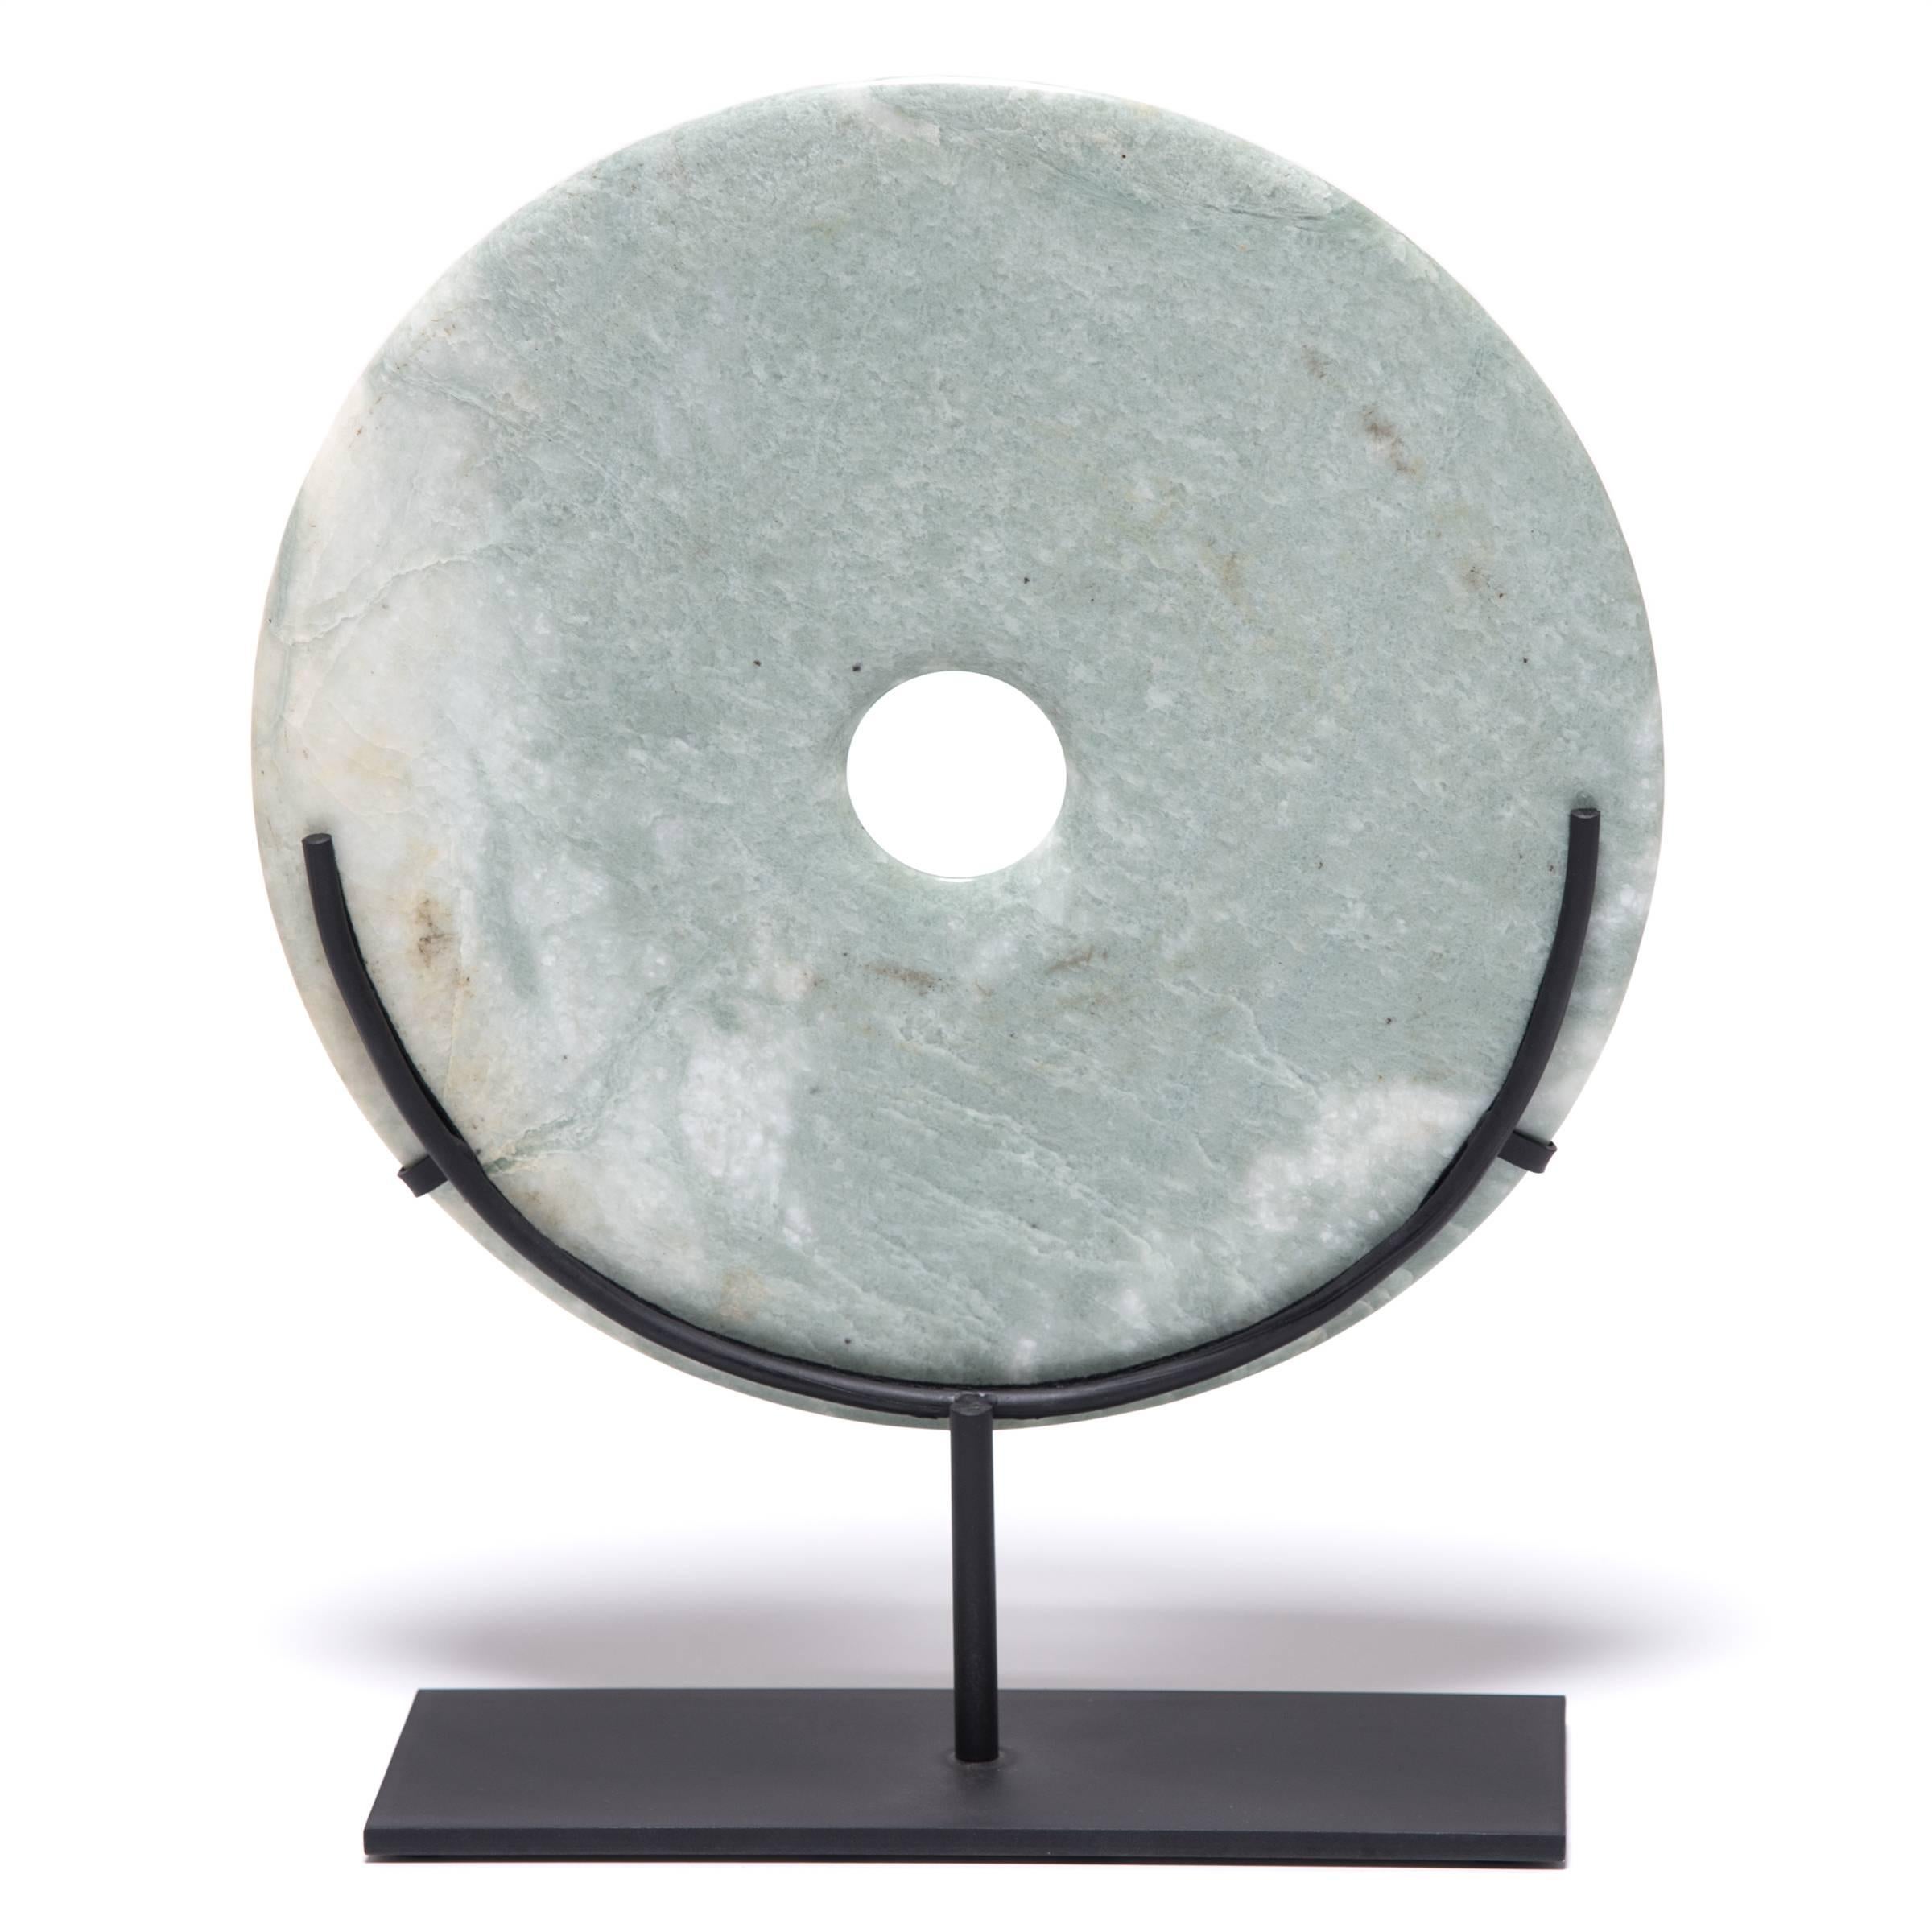 The creamy green color and natural variegation of this jade disk calls to mind a full moon on a dark night. Known as “bi,” these perfectly round discs with a circular hole in the centre originally date from Neolithic times. This contemporary example